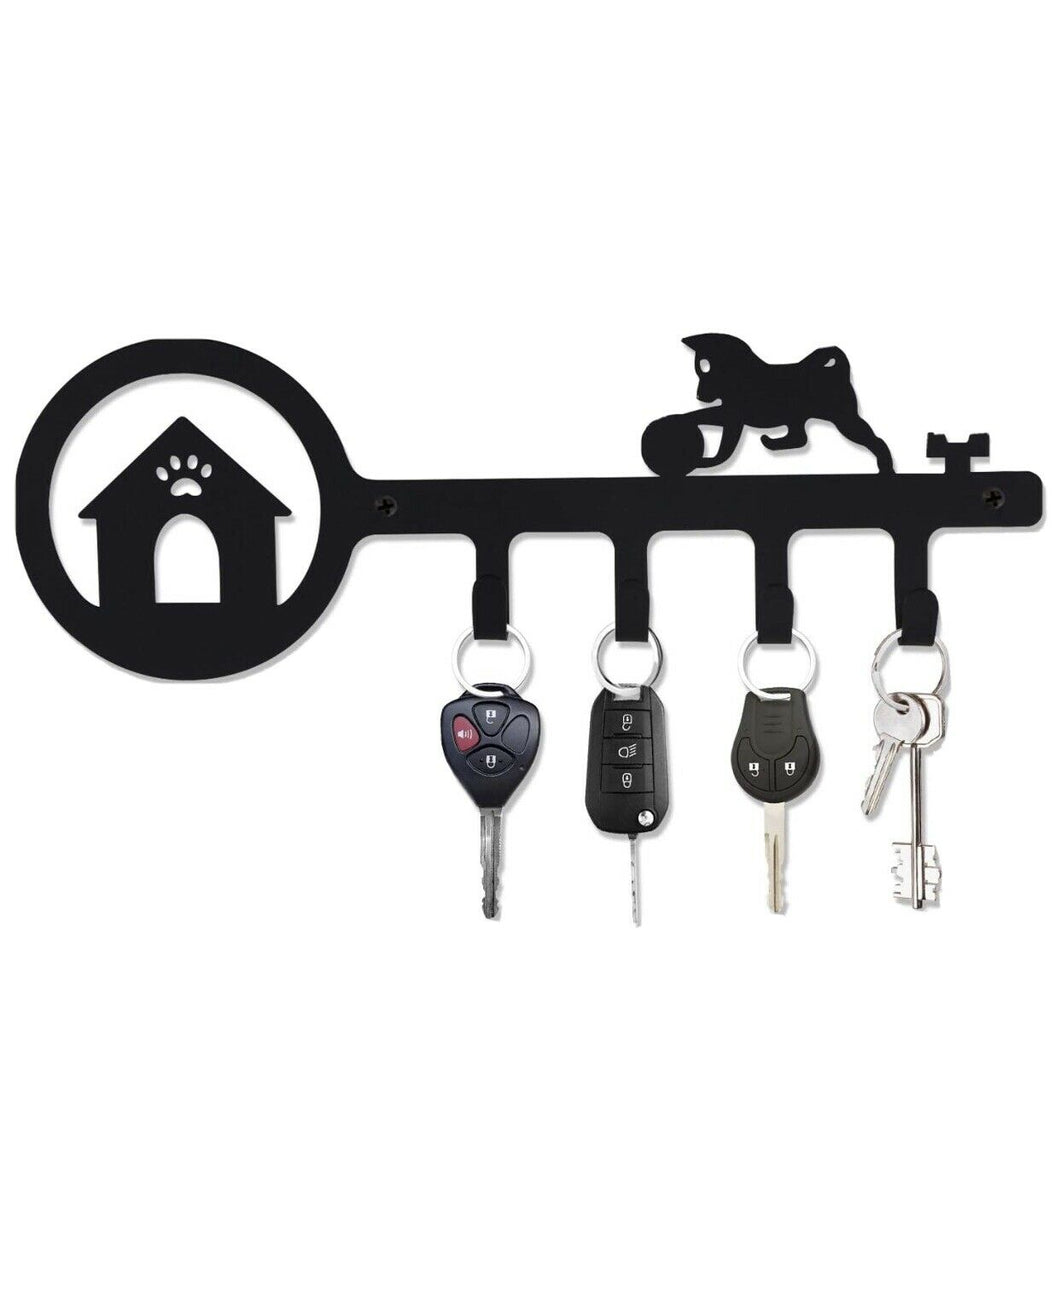 Pricuitie Decorative Wall Mounted Iron Key Holder(Black, The Playing Dog)